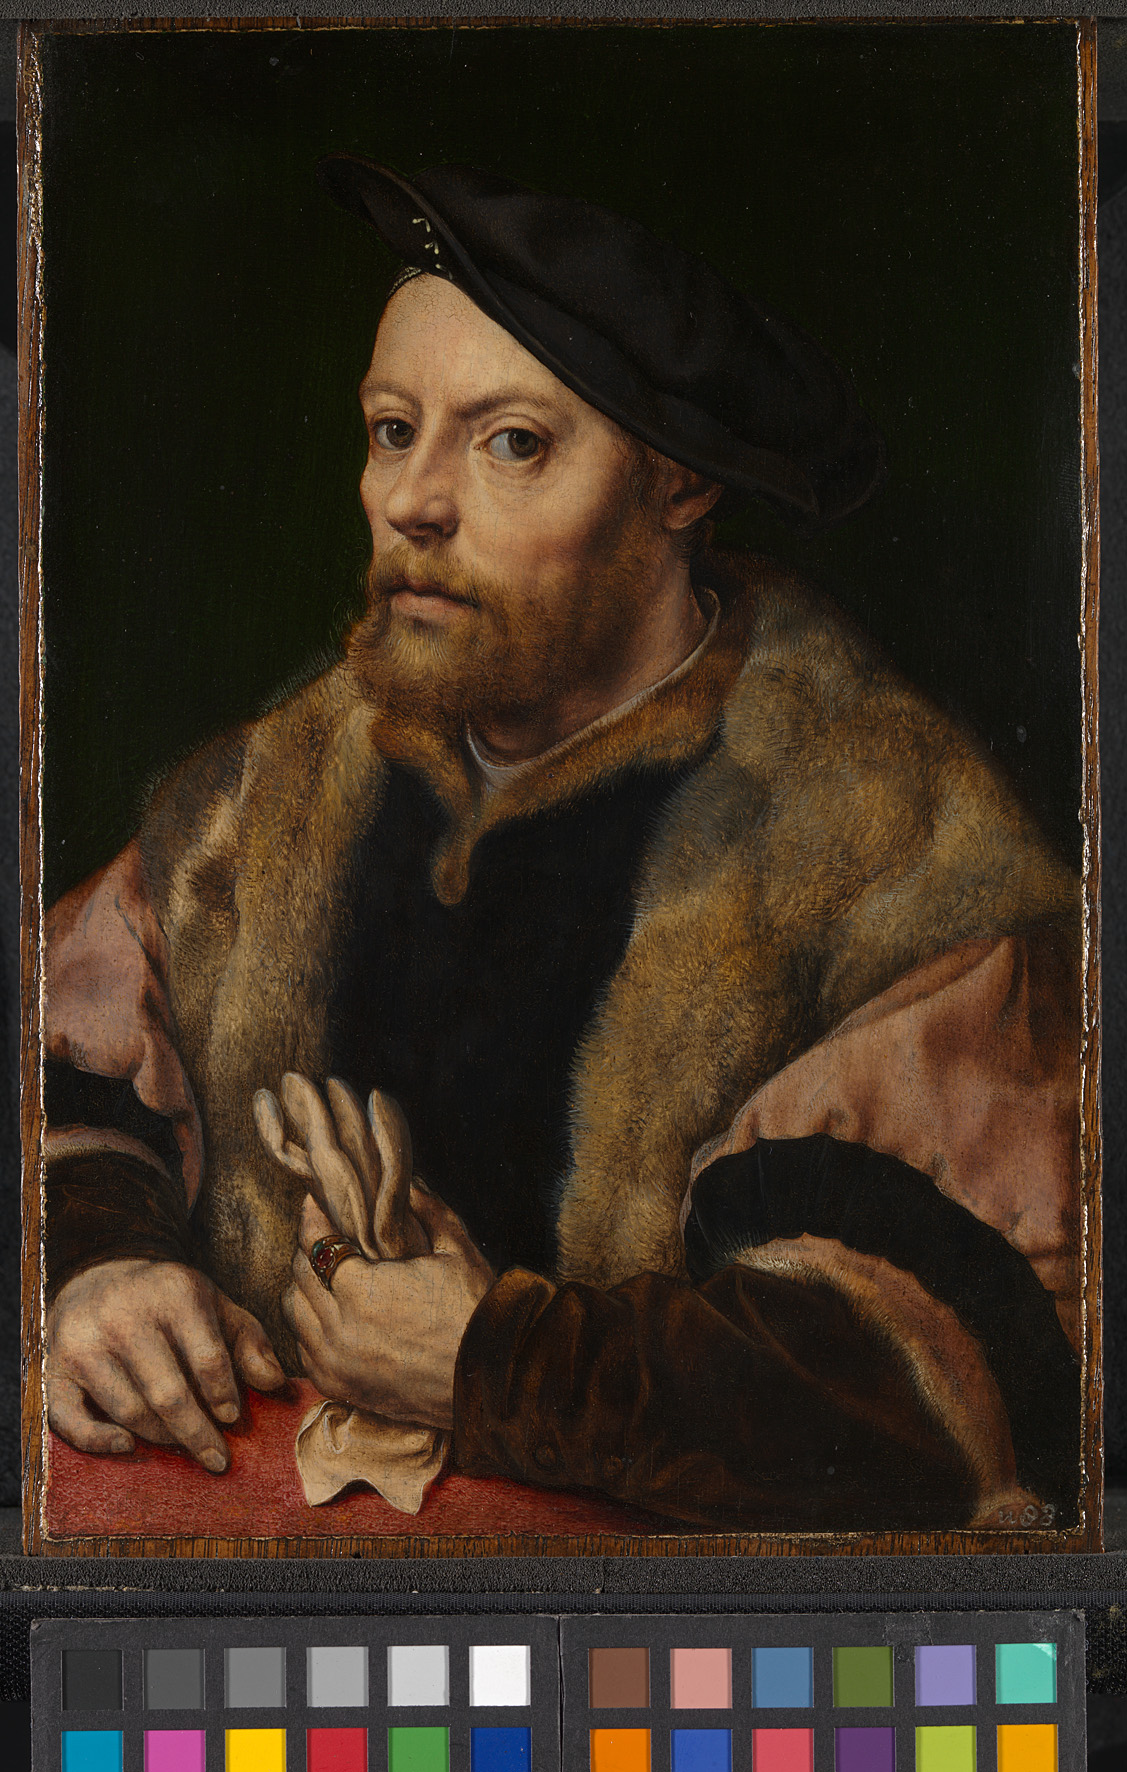 Jan Gossaert (active 1503; died 1532)
A Man holding a Glove, about 1530 2
Oil on oak
The National Gallery, London
© The National Gallery, London
